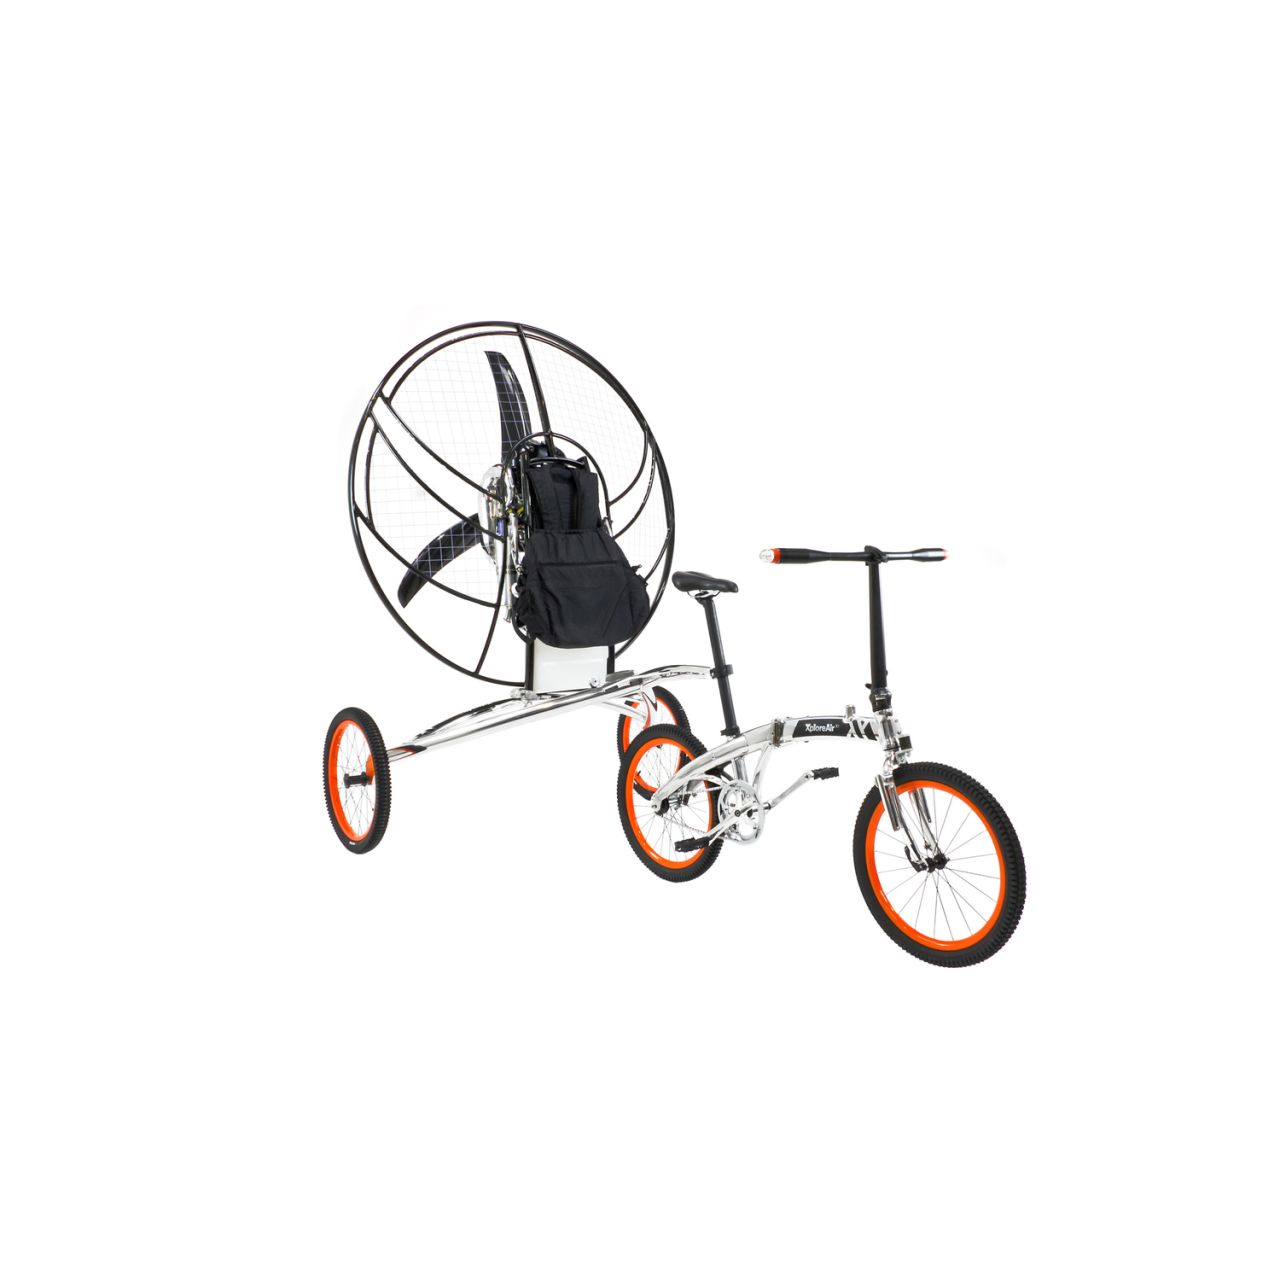 The Paravelo looks like a conventional bike connected to a two-wheeled trailer. Both the airframe and bike are made from aircraft grade aluminum.